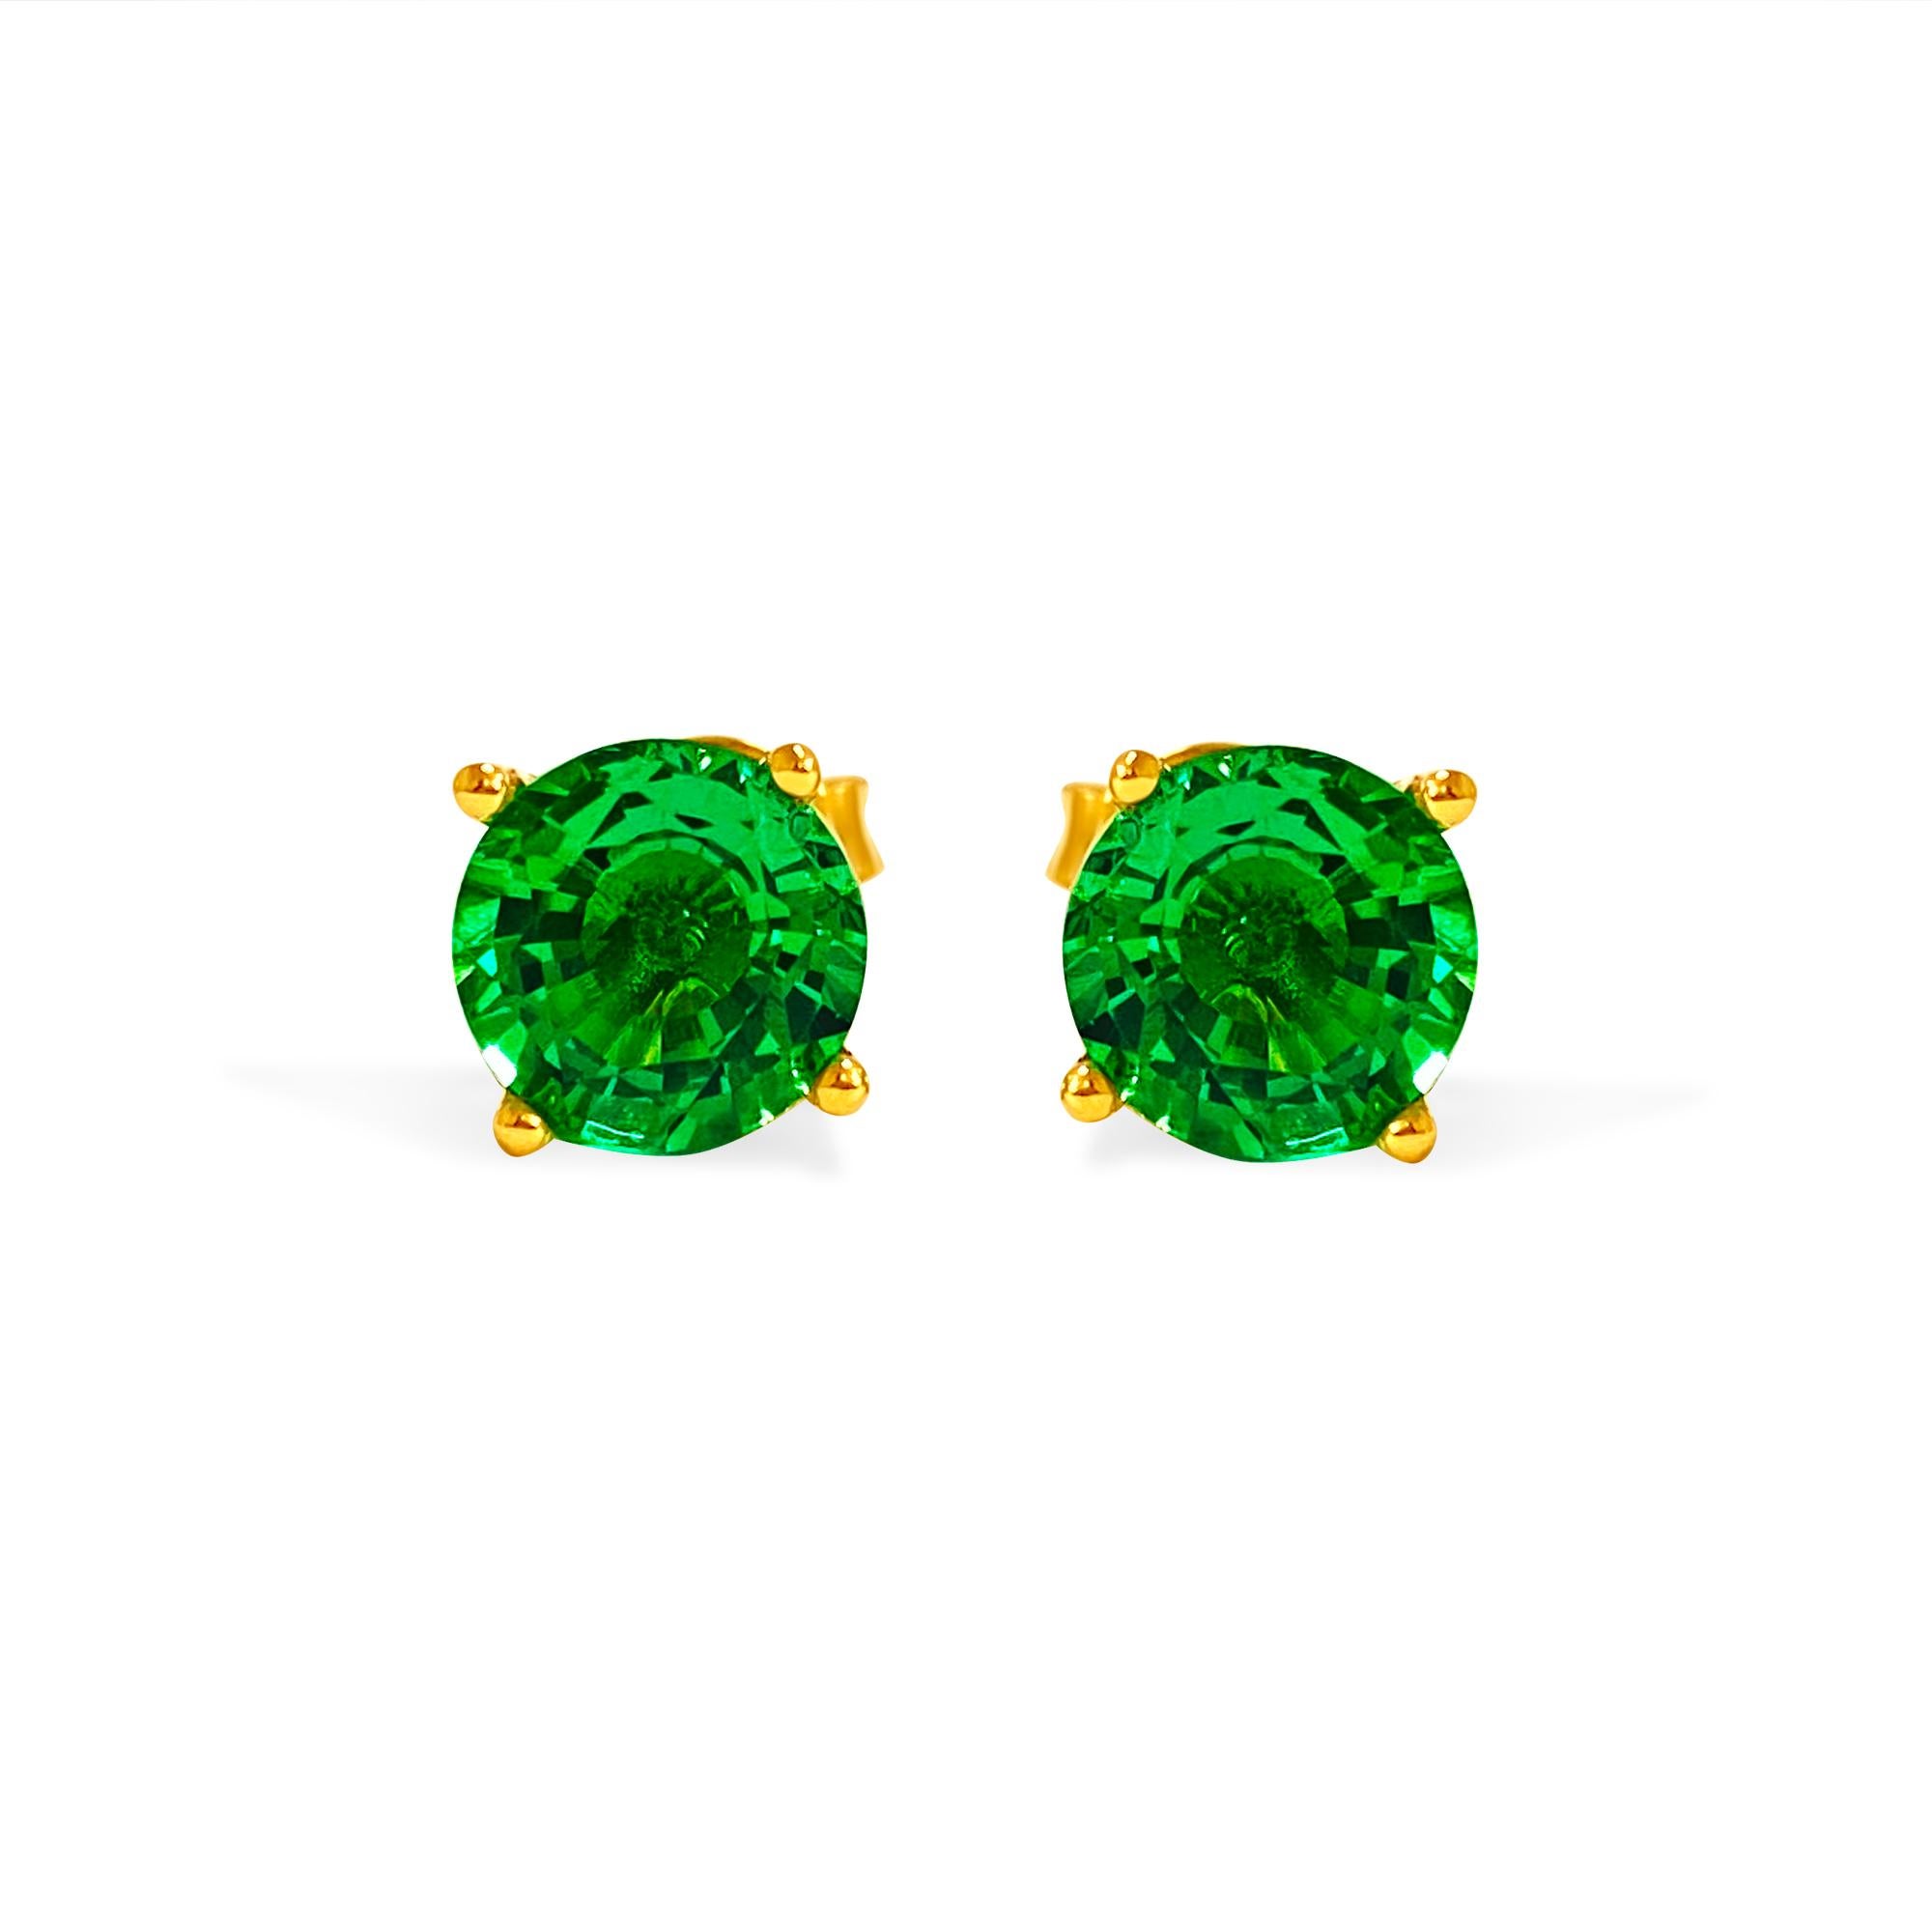 4ct Emerald Studs in 14k Yellow Gold Unisex 